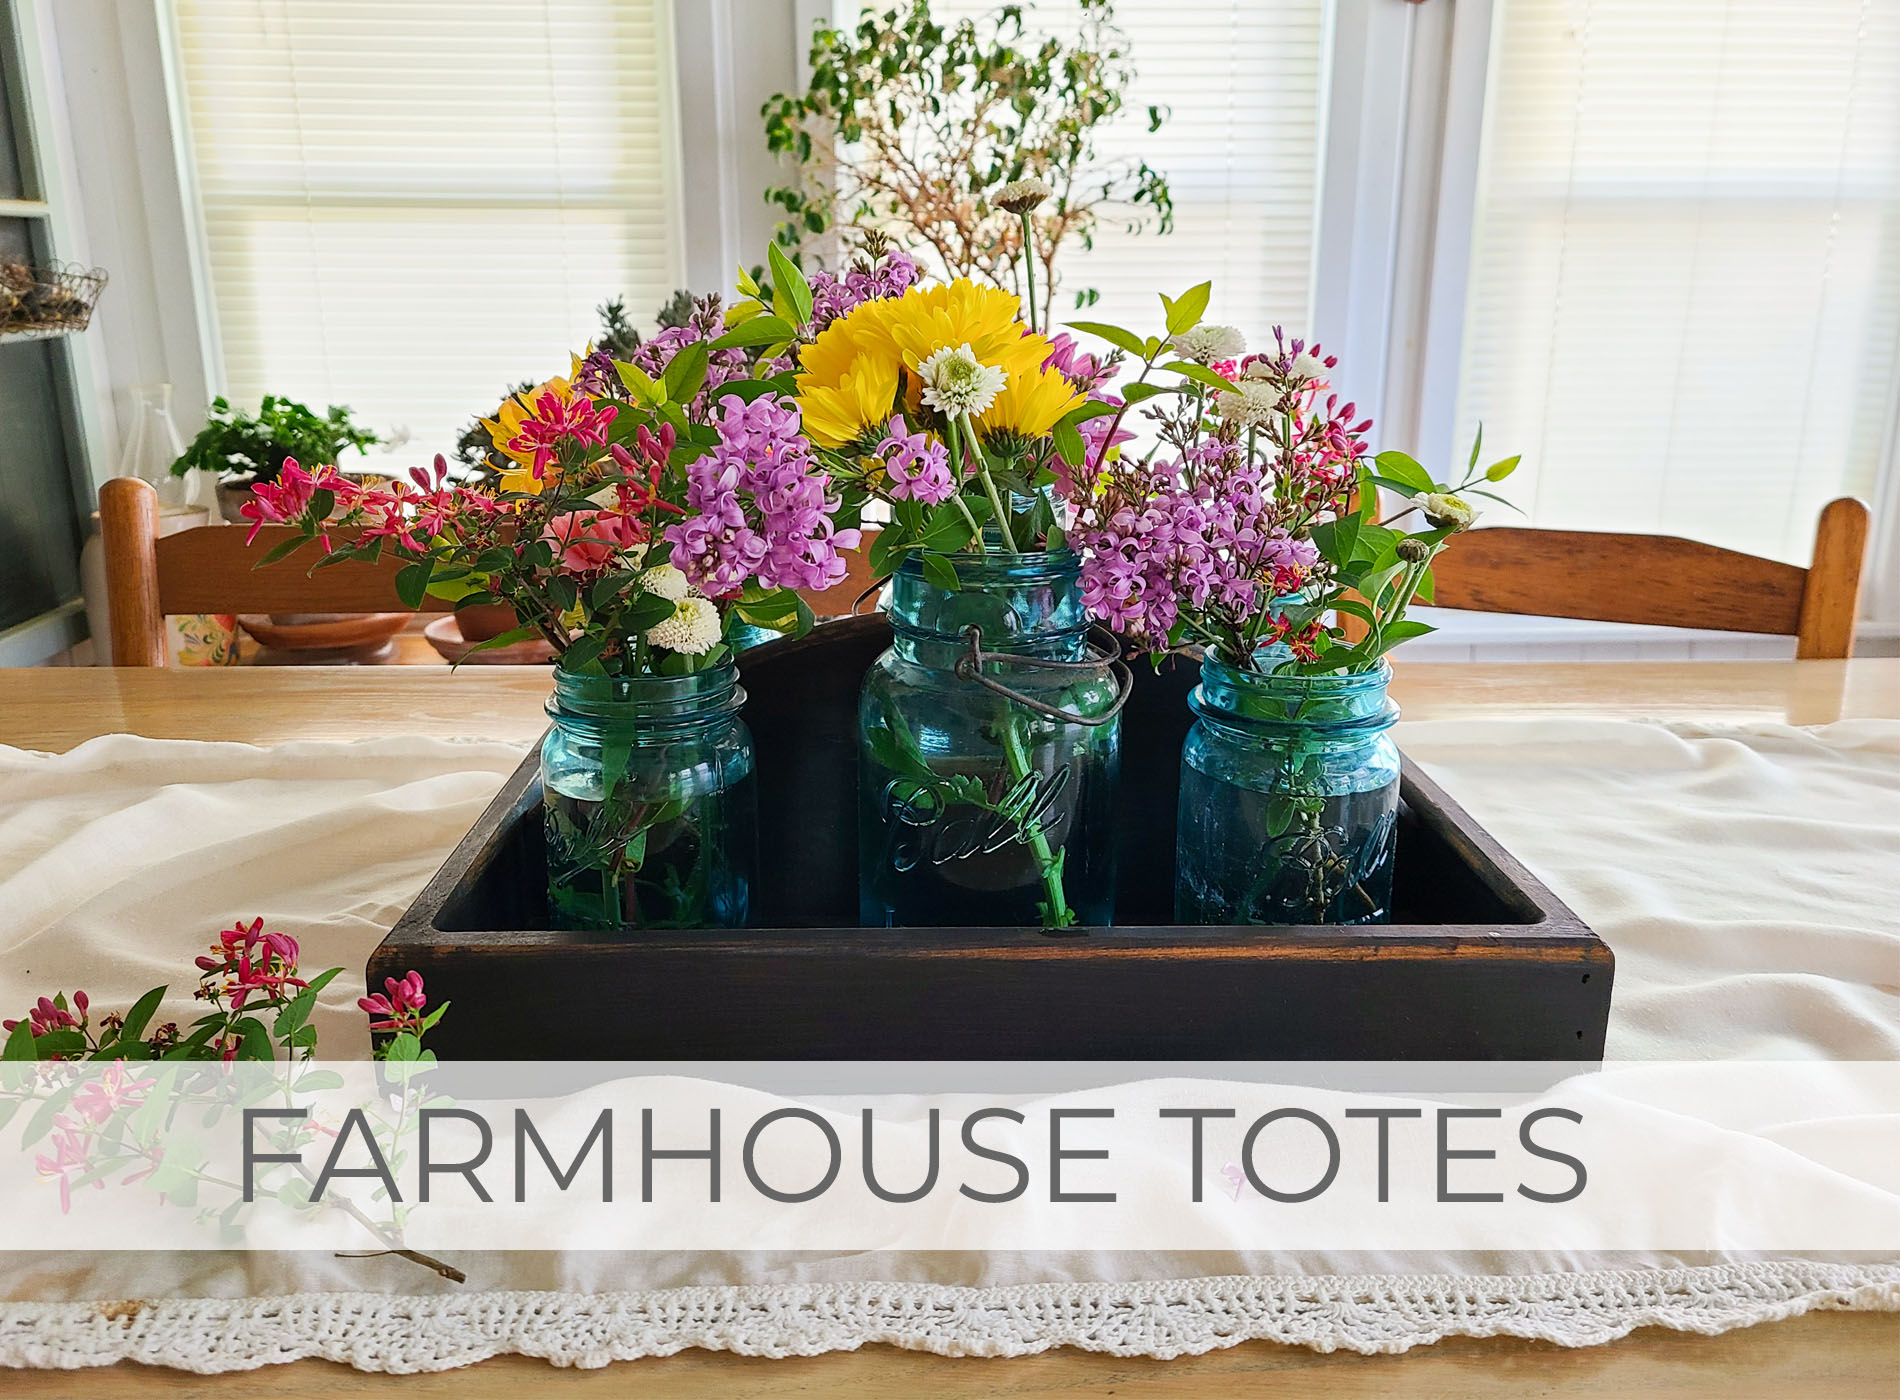 Farmhouse Totes Makeover by Larissa of Prodigal Pieces | prodigalpieces.com #prodigalpieces